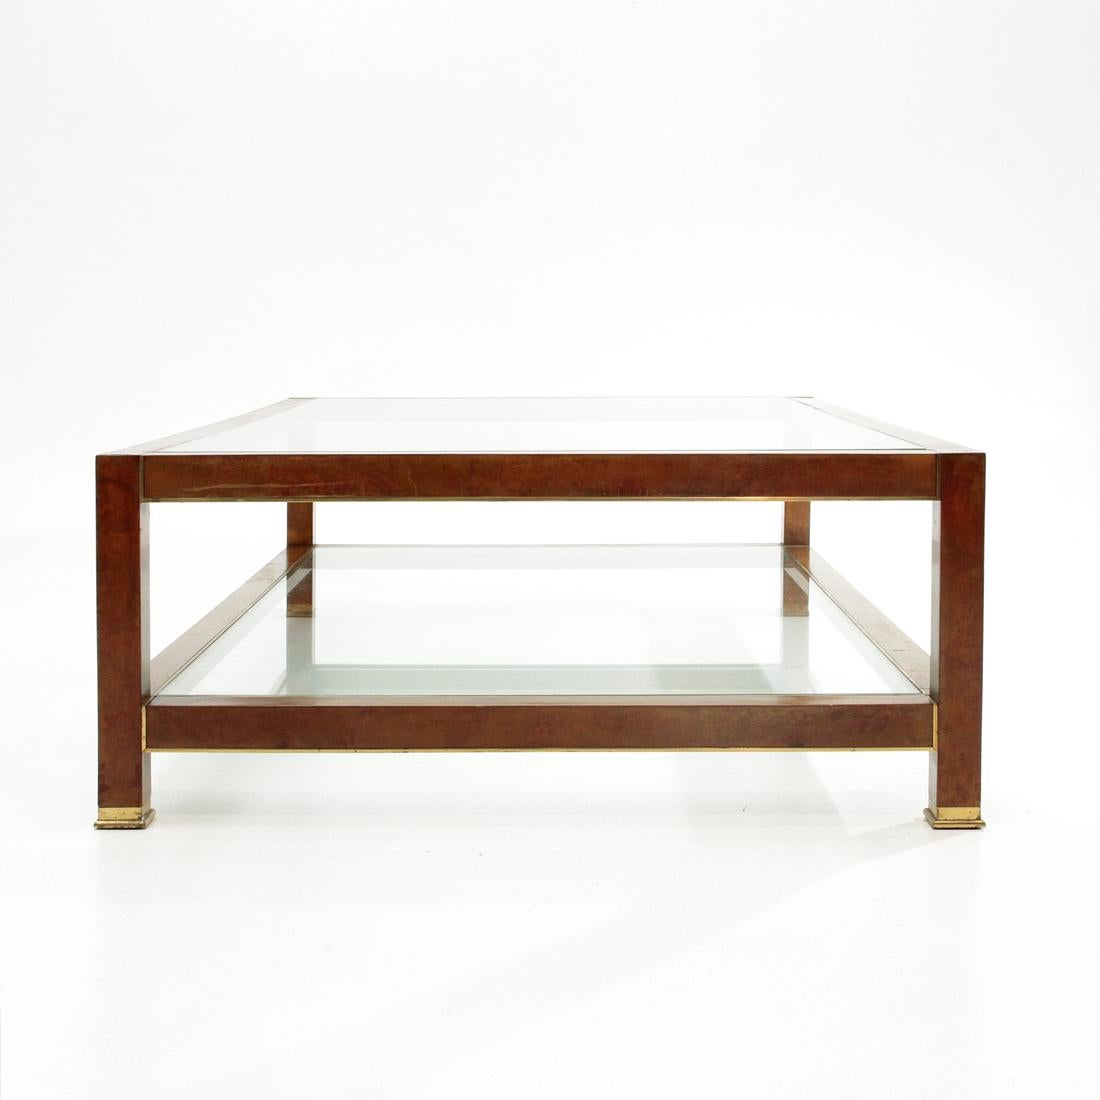 Coffee table of Italian manufacture produced in the 1970s.
Large rectangular structure in briar veneered wood, and brass.
Transparent glass top.
Feet in brass.
Good general conditions, some signs and lack of veneer due to normal use over